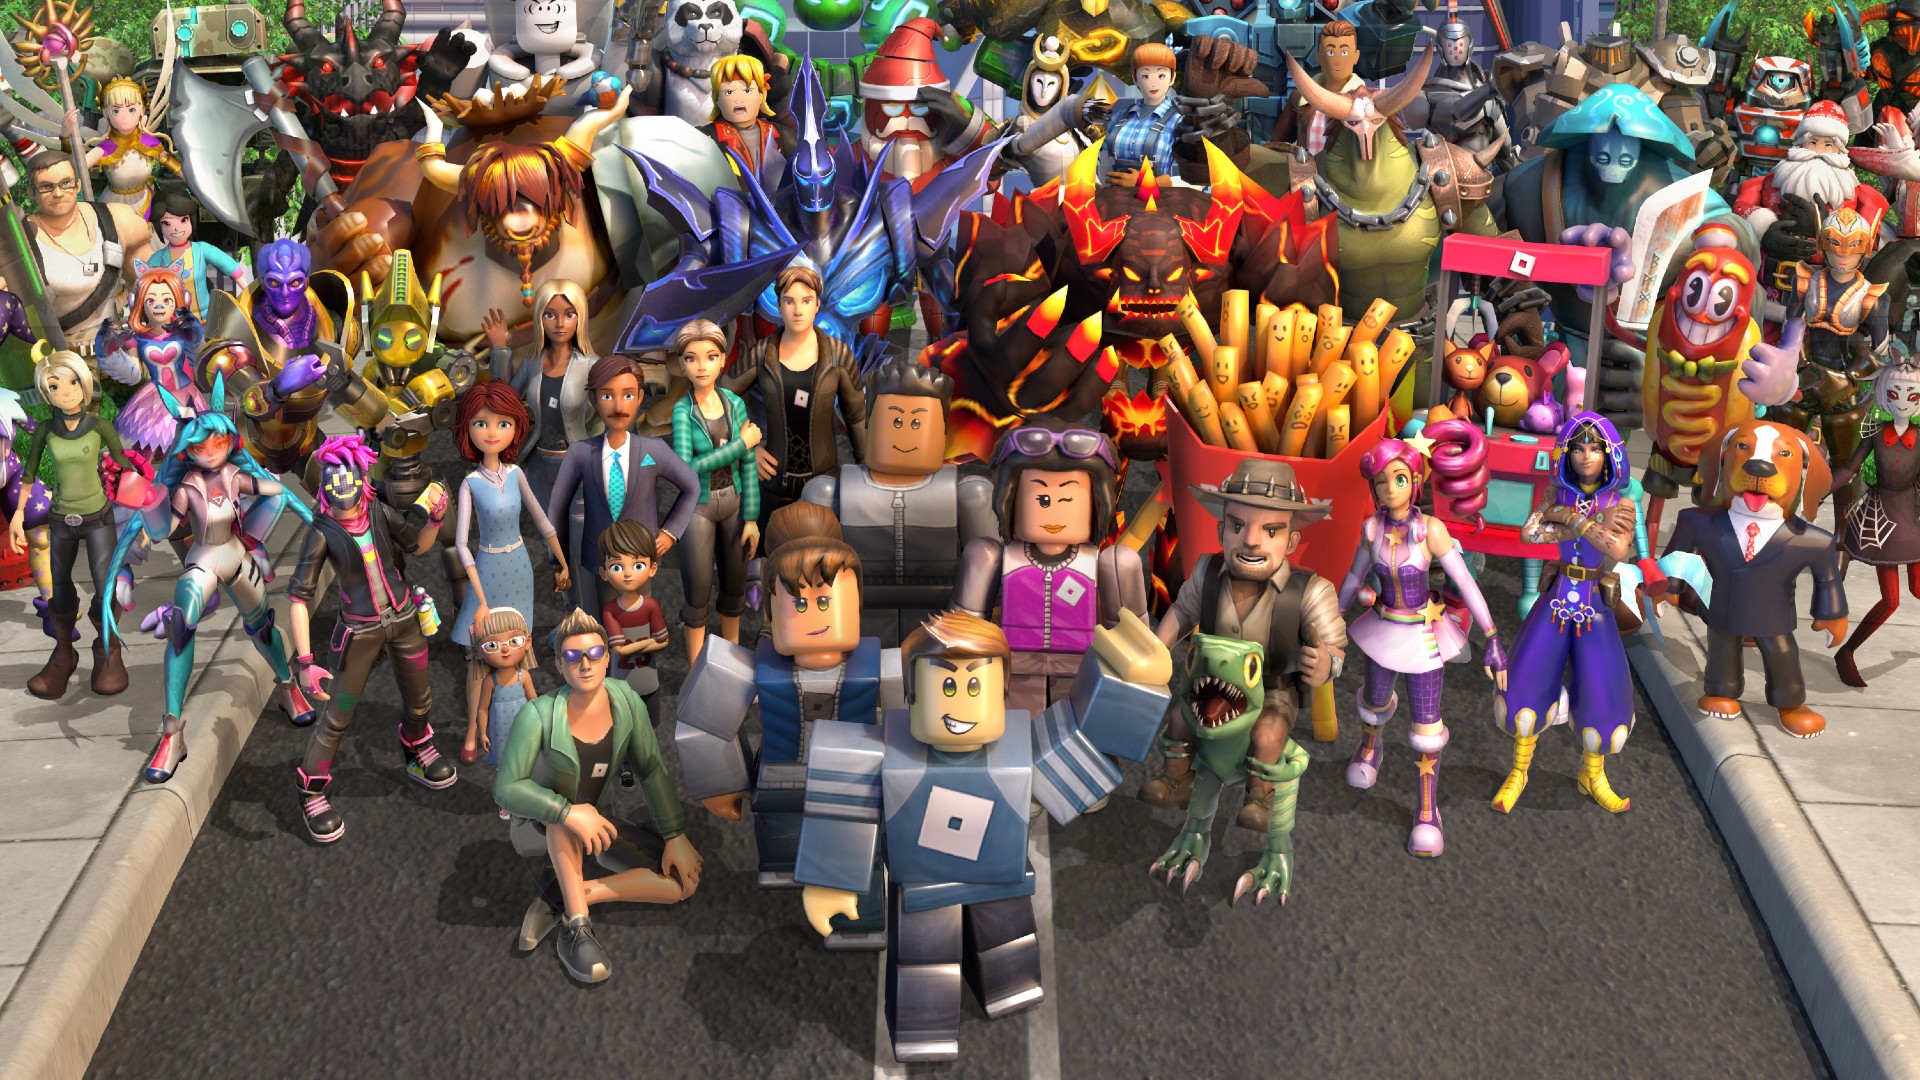 Roblox promo codes list December 2021 – how to redeem